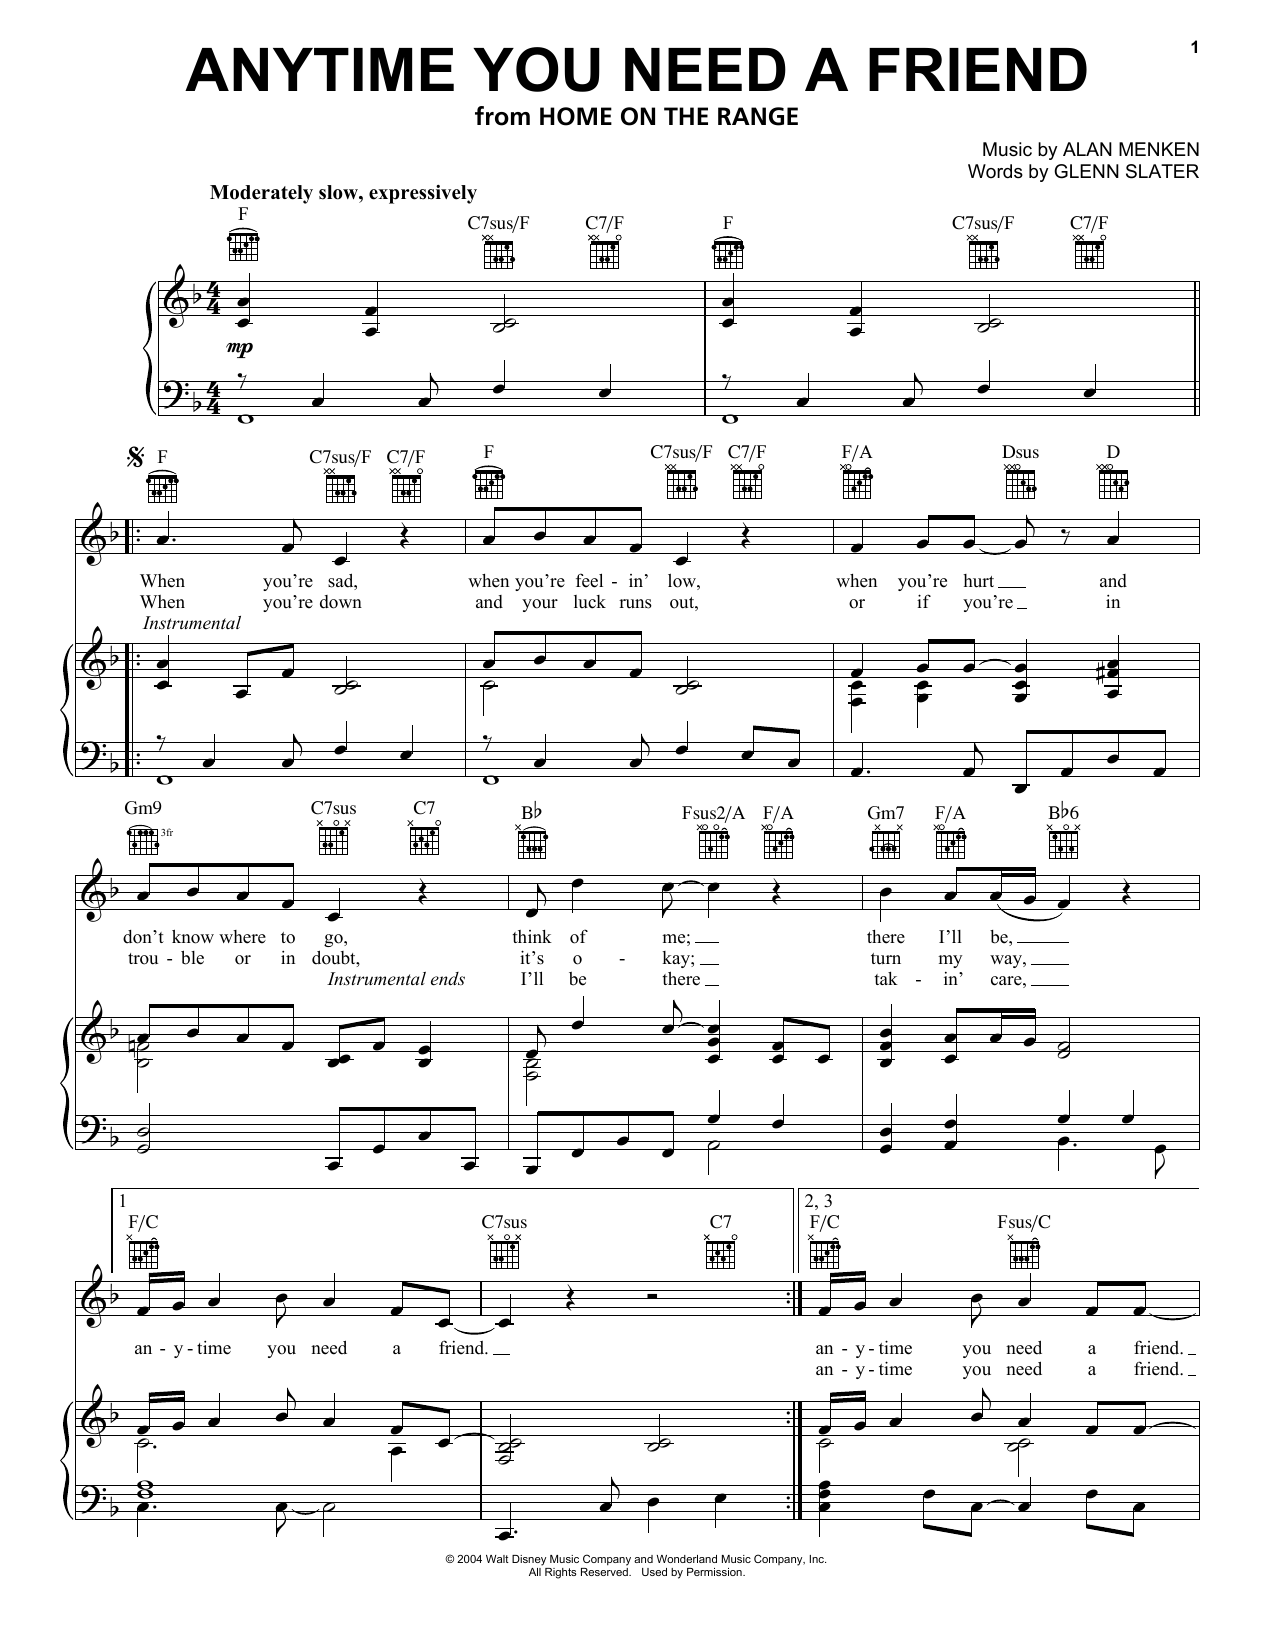 Download The Beu Sisters Anytime You Need A Friend Sheet Music